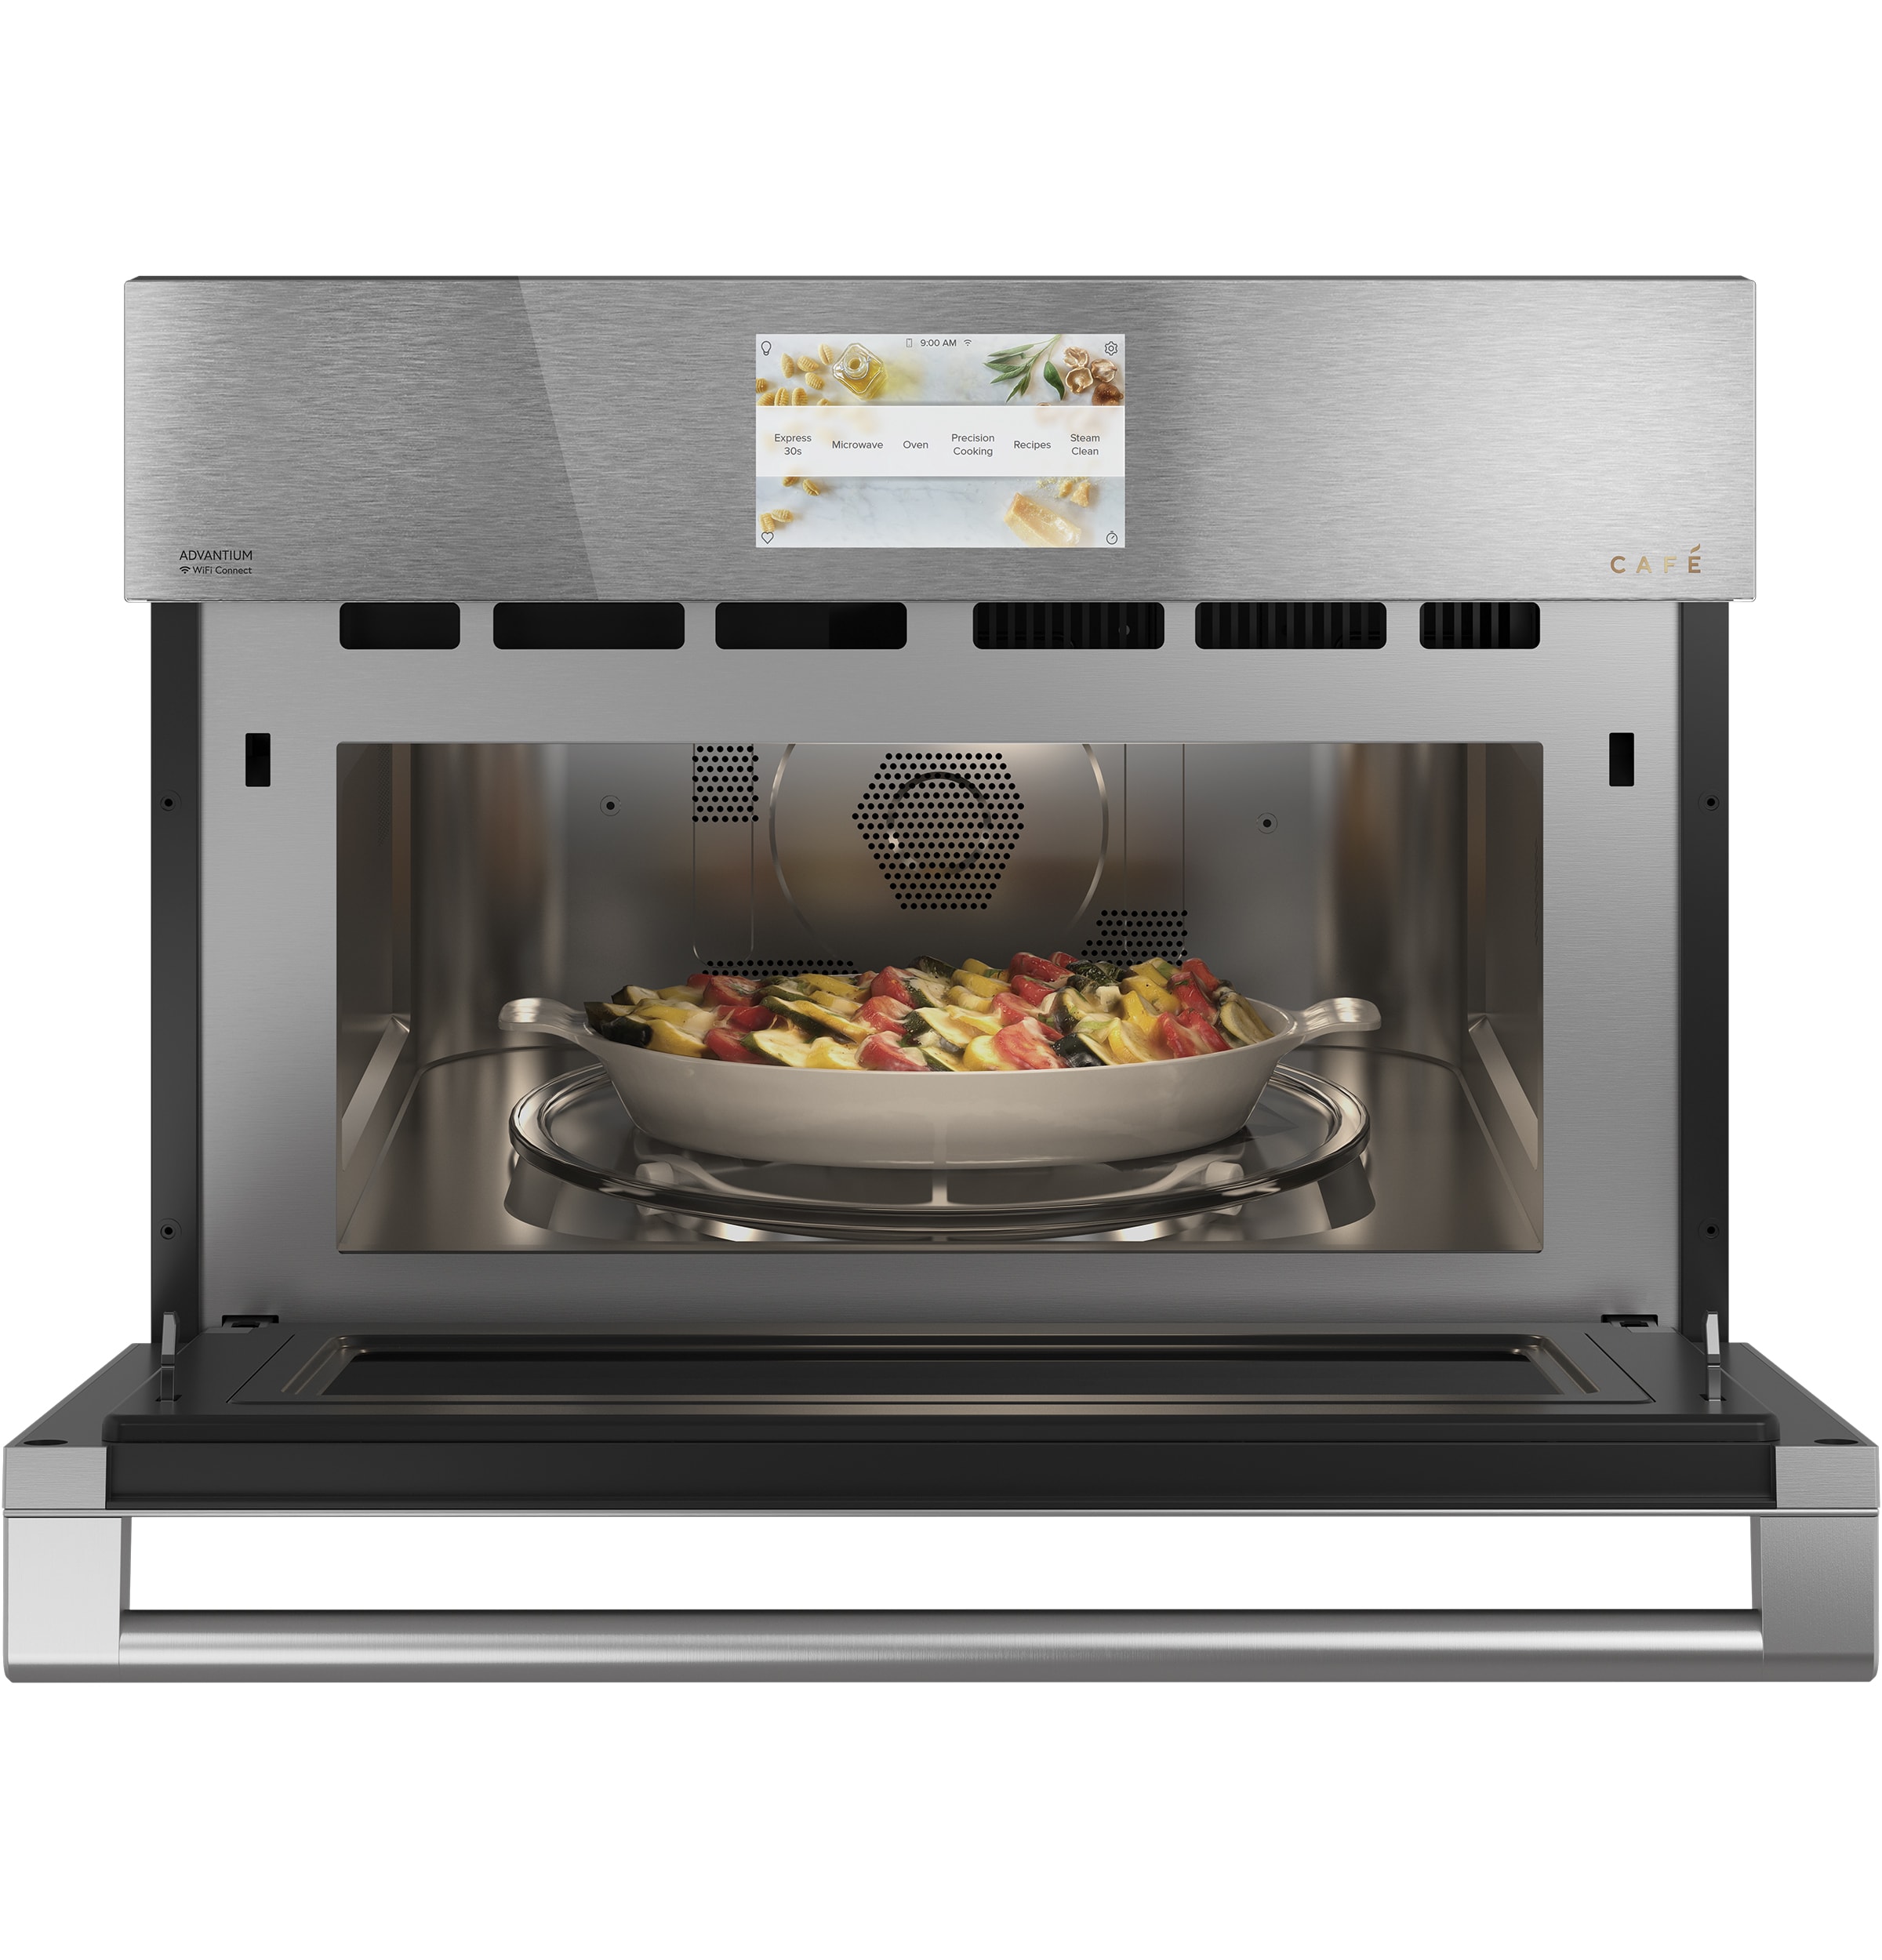 DISCONTINUED MODEL CLEARANCE! Café™ 1.5 Cu. Ft. Smart Countertop  Convection/Microwave Oven in Platinum Glass